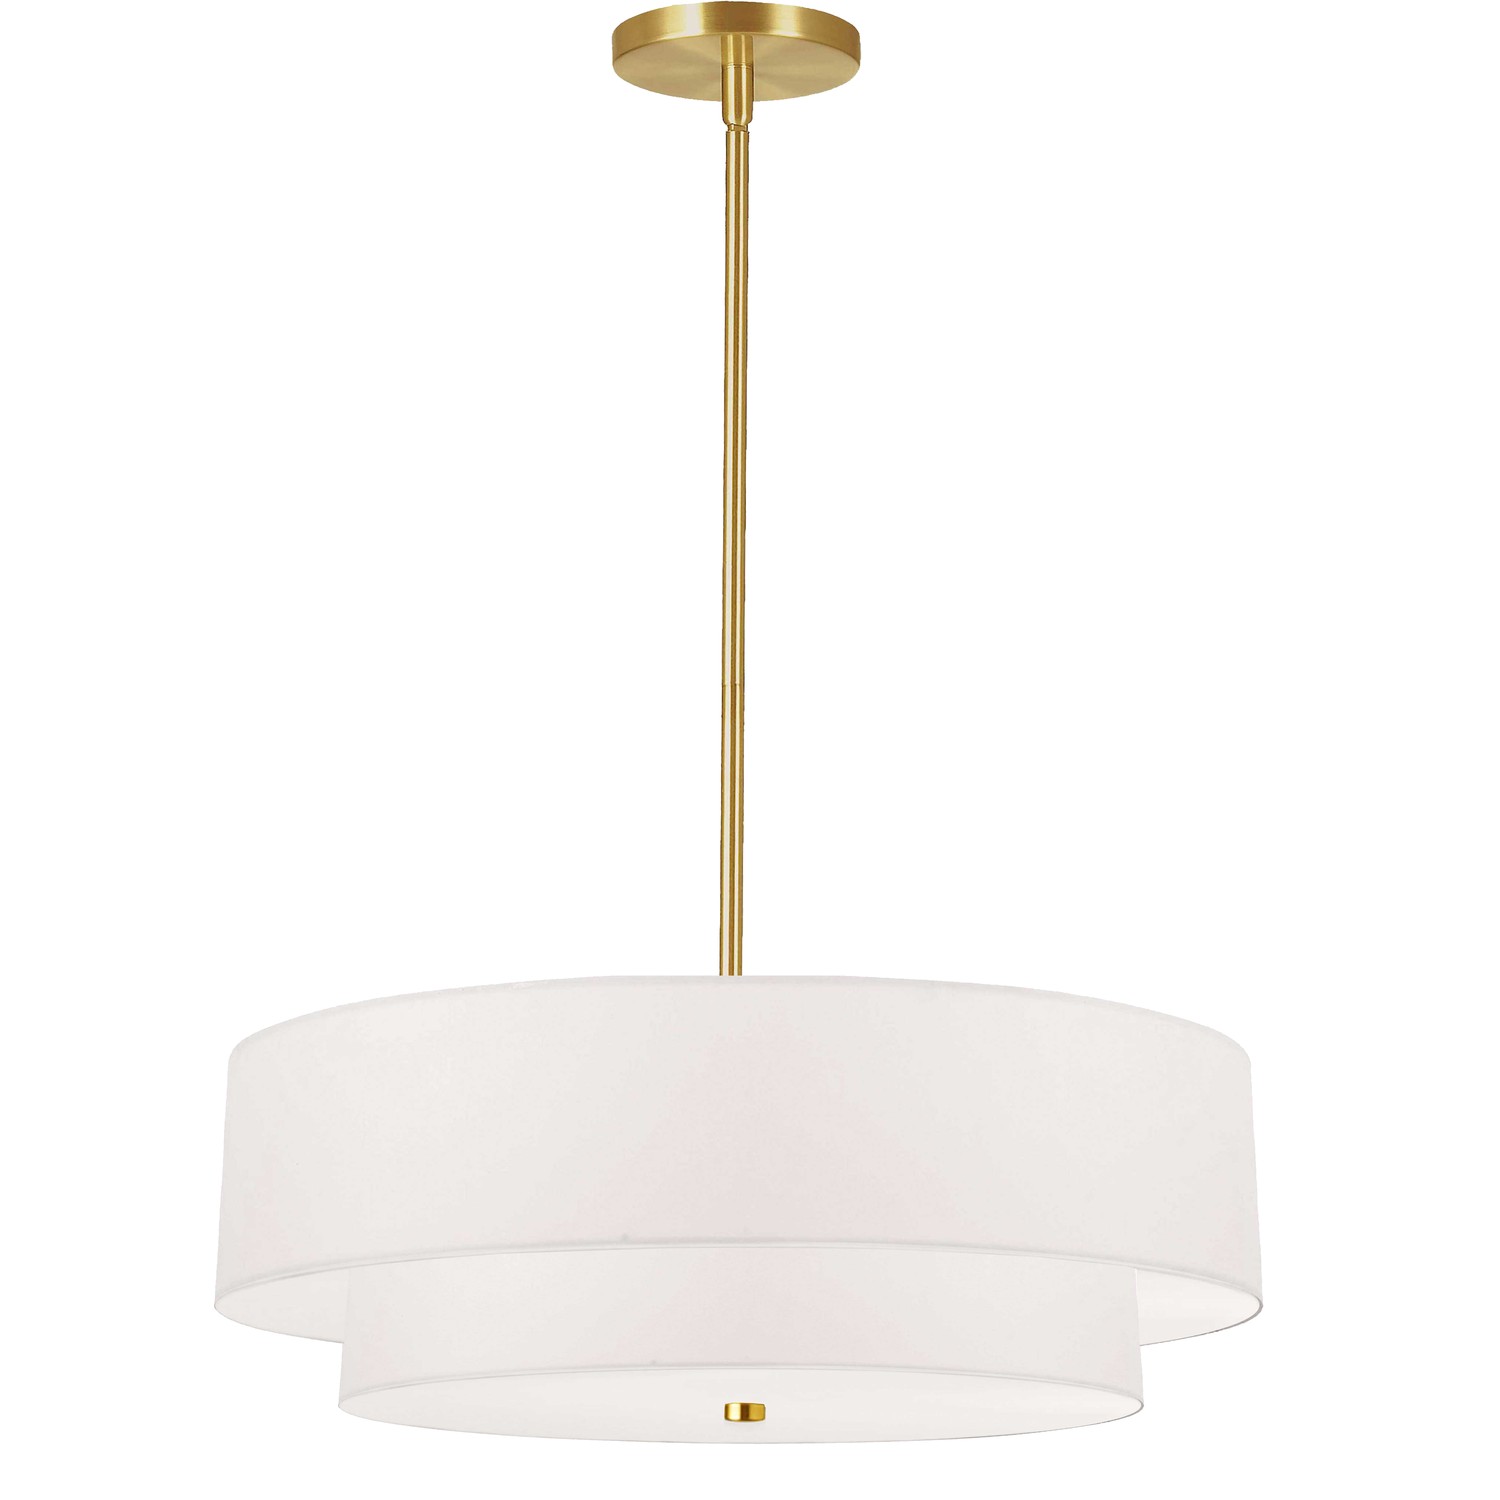 4 Light Incandescent 2 Tier Pendant, Aged Brass with White Shade